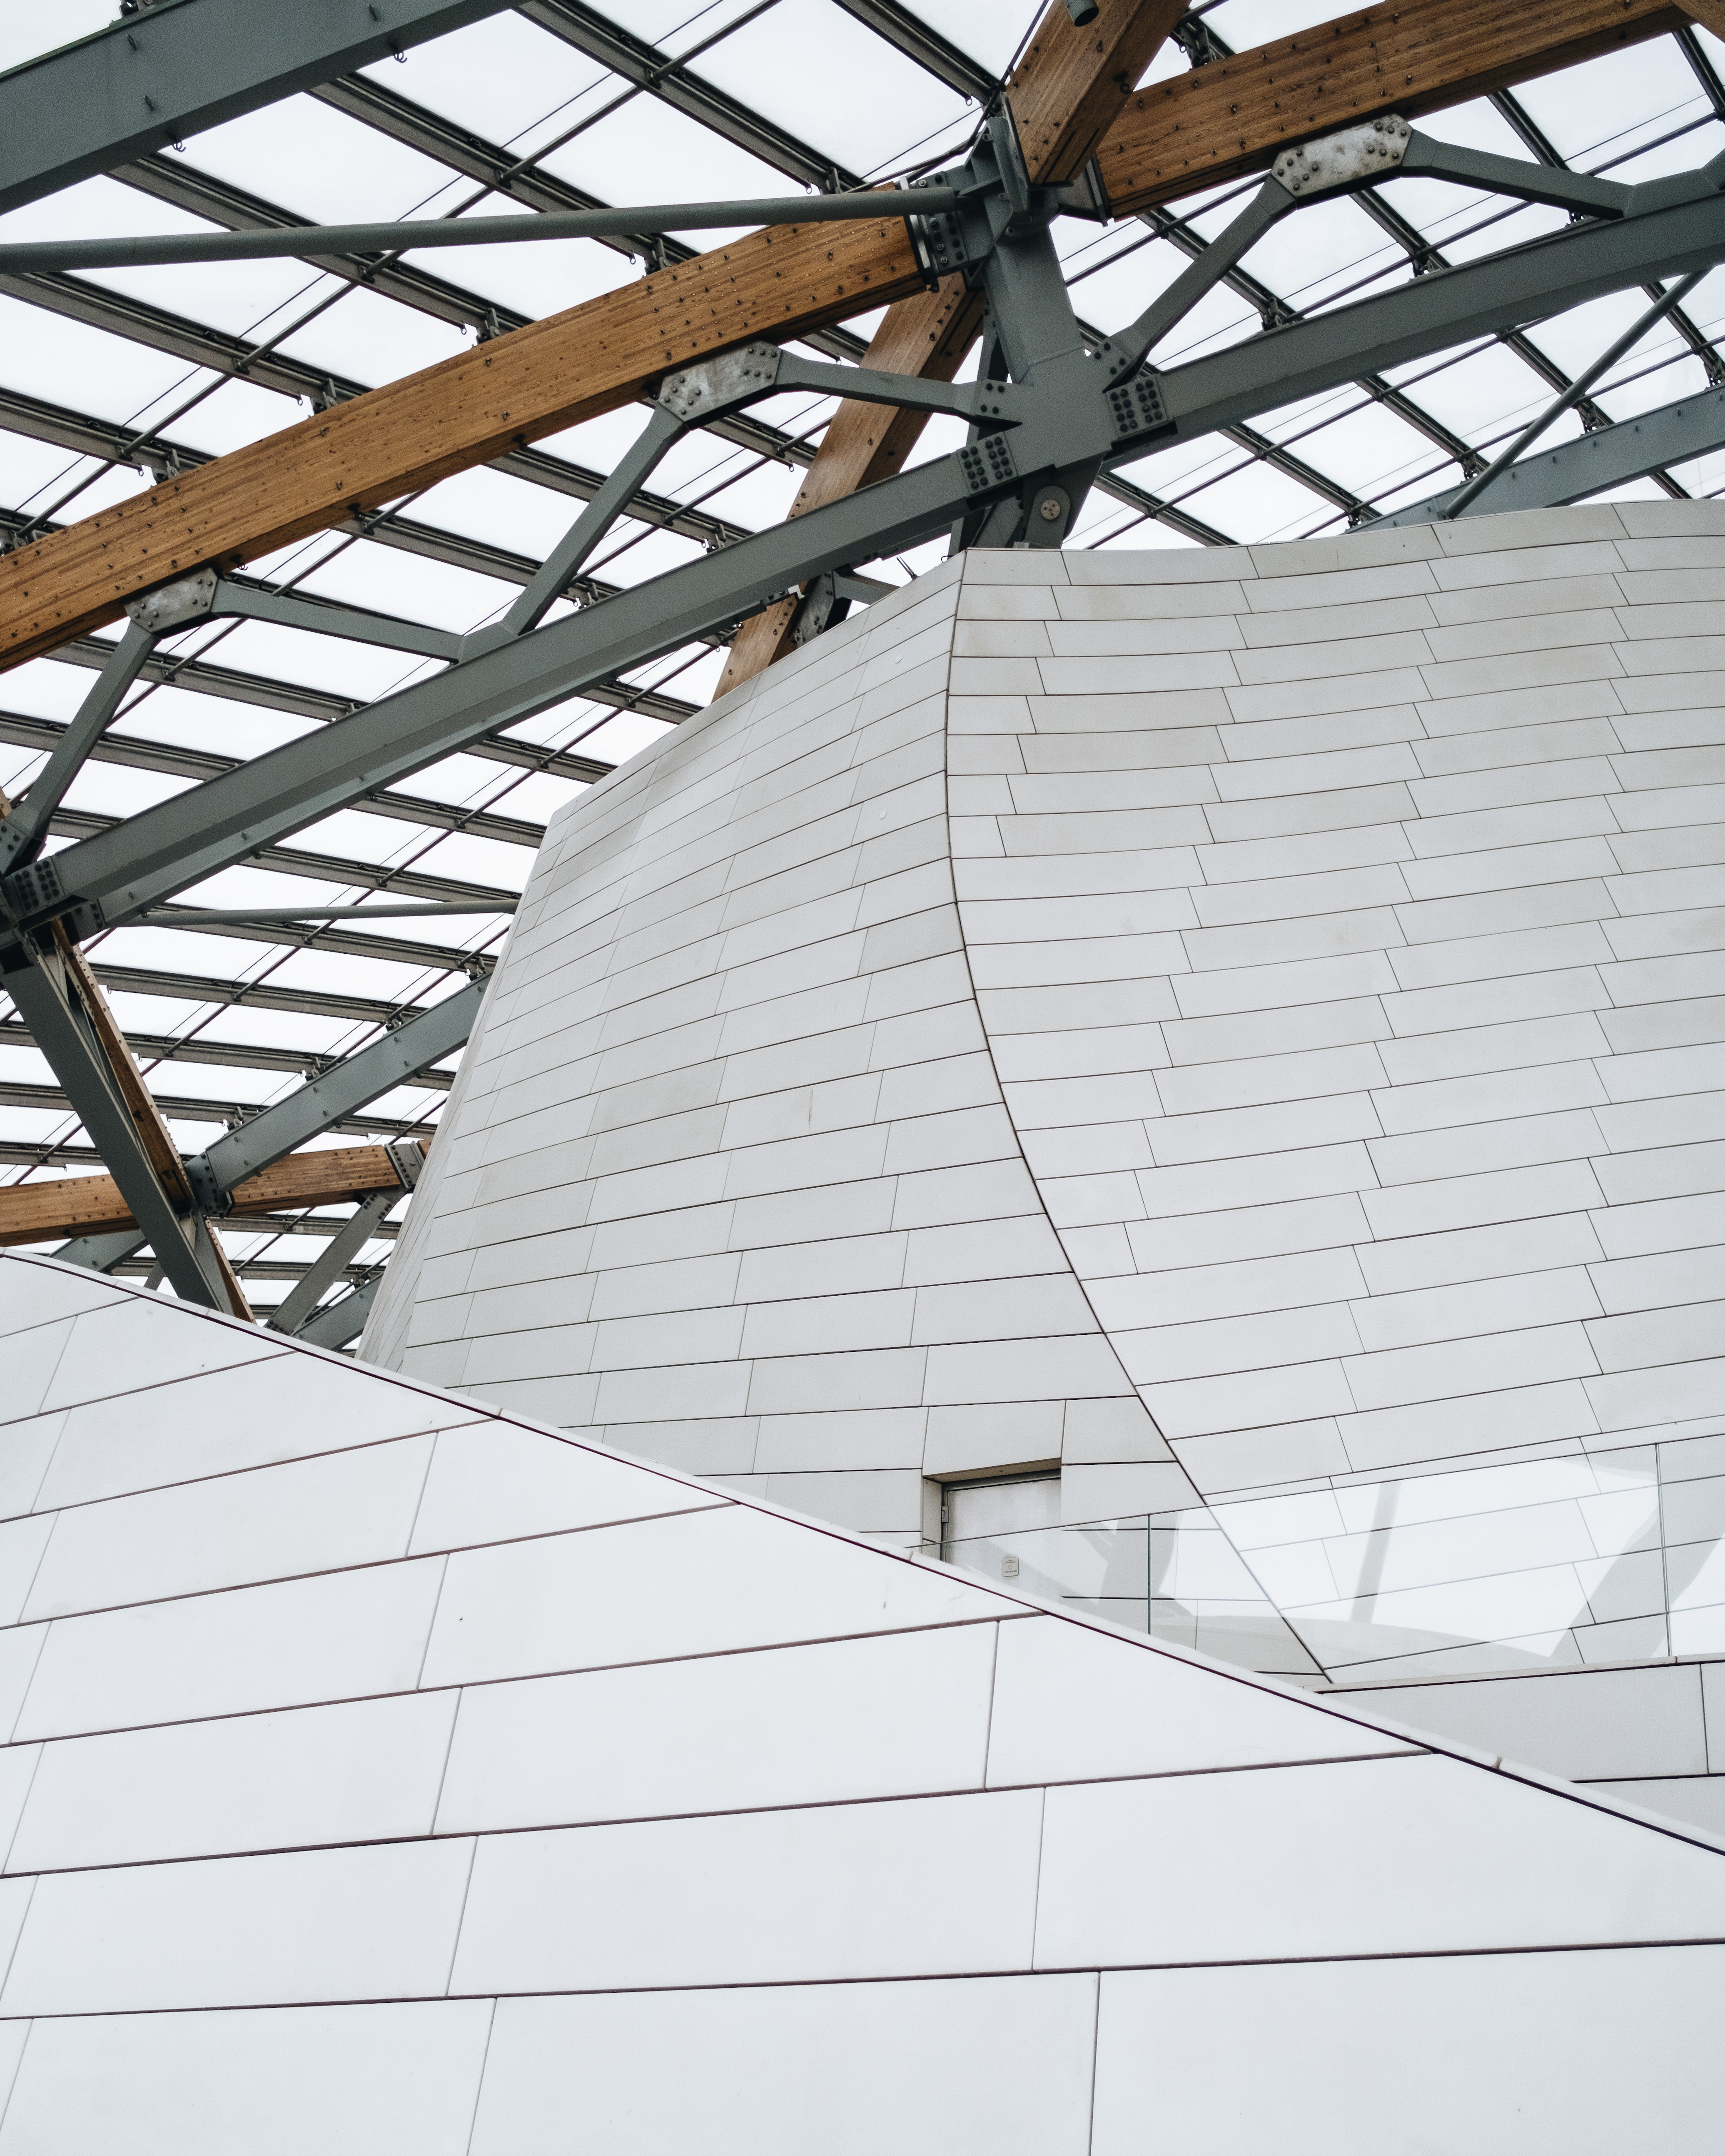 Frank Gehry exhibition at Fondation Louis Vuitton